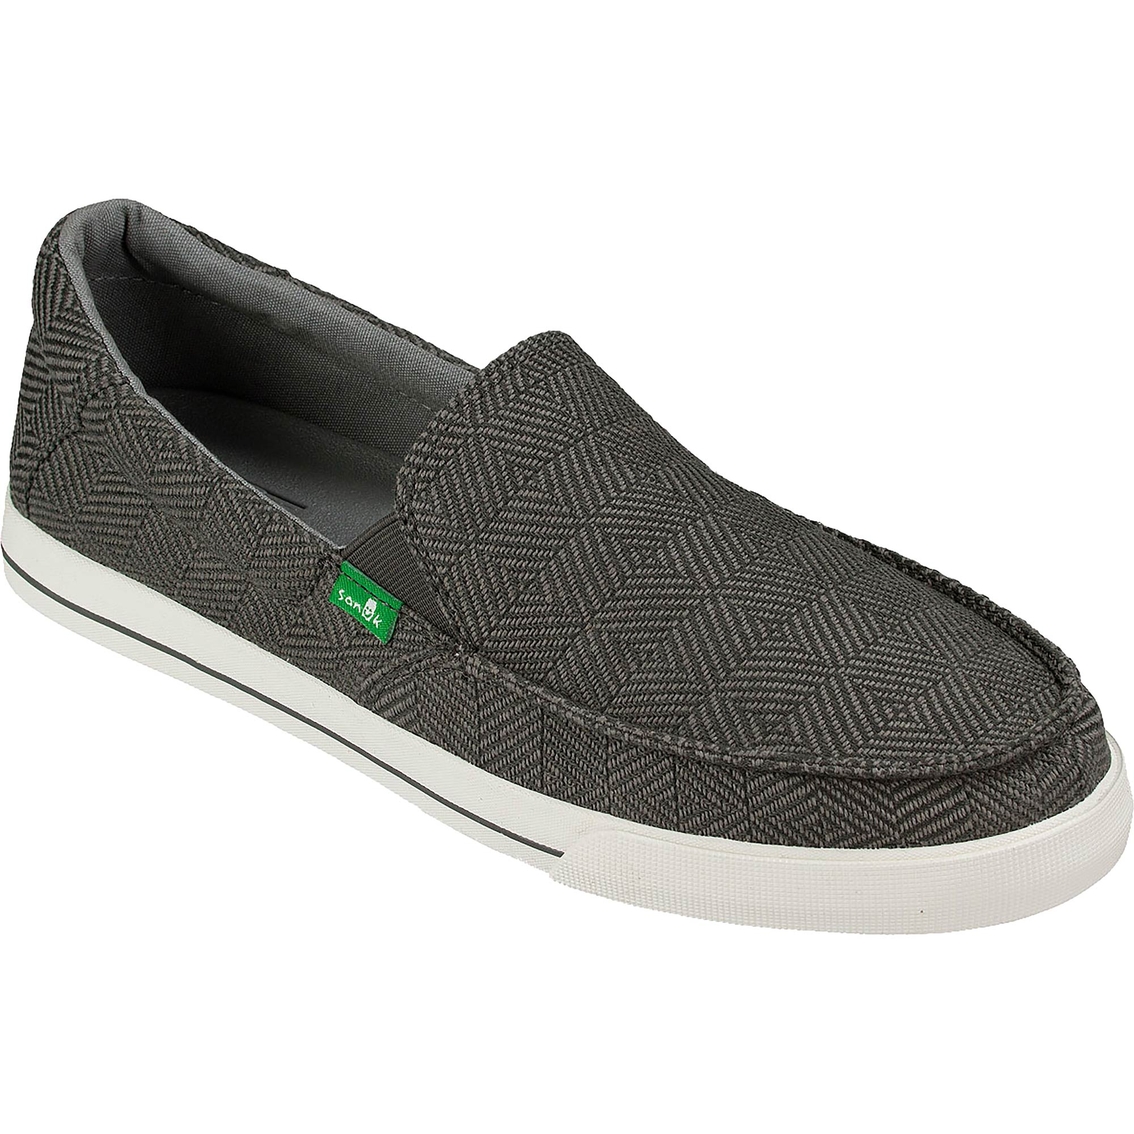 Sanuk Men's Sideline Checked Shoes | Casuals | Shoes | Shop The Exchange